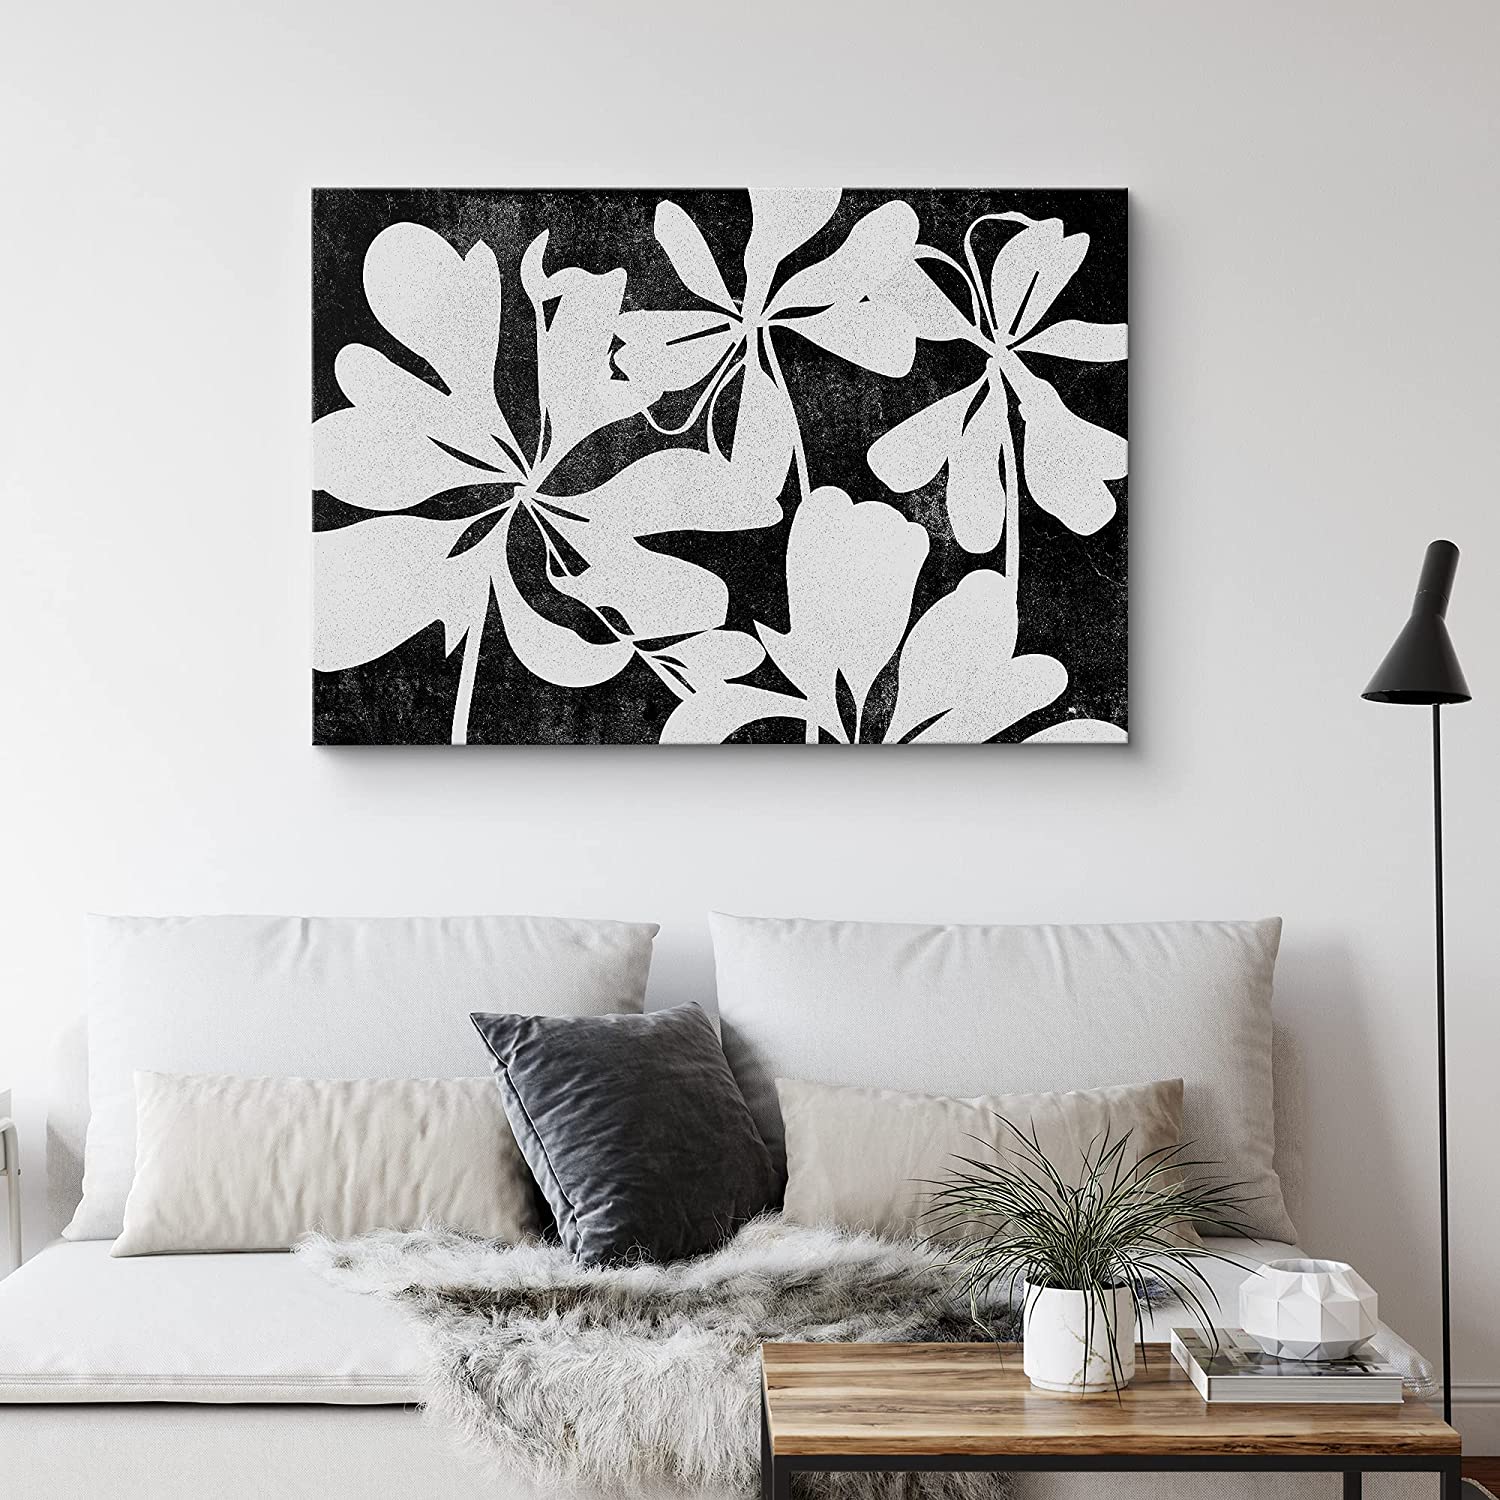 PixonSign Canvas Print Wall Art Wood Sorrel Flowers Floral Wilderness  Illustrations Minimalist Chic Relax/Calm Grey Dark Black and White for  Living Room, Bedroom, Office 16